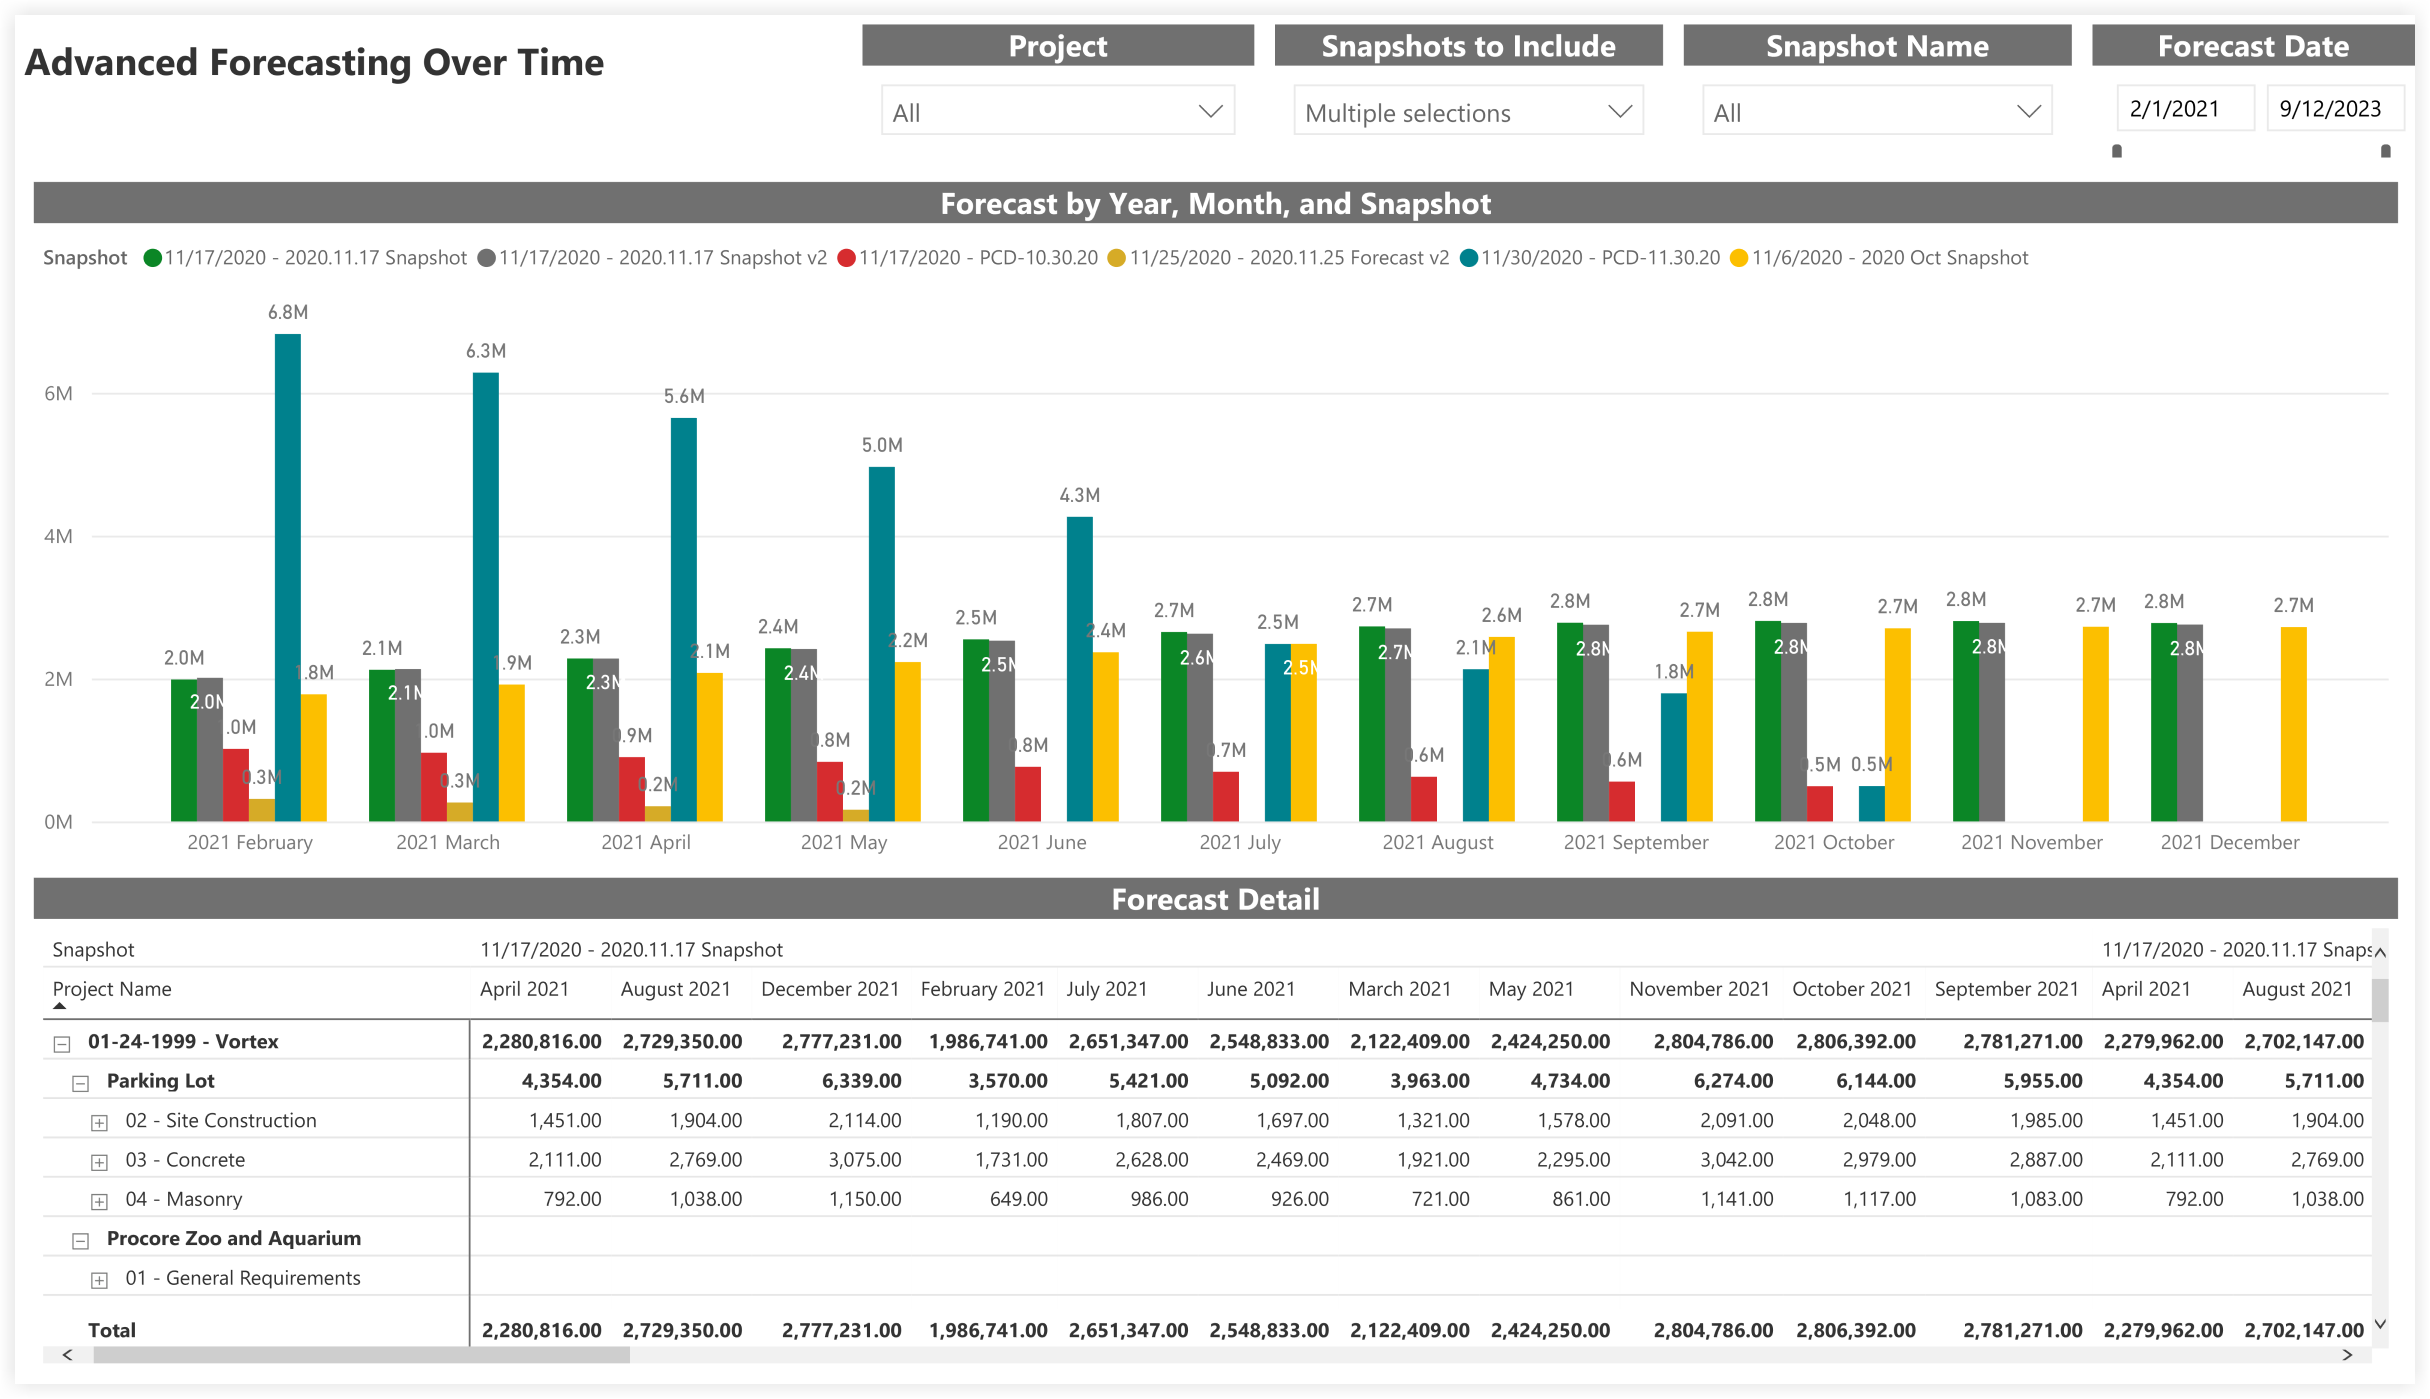 procore-analytics-financials-budget-advanced-forecasting-over-time.png